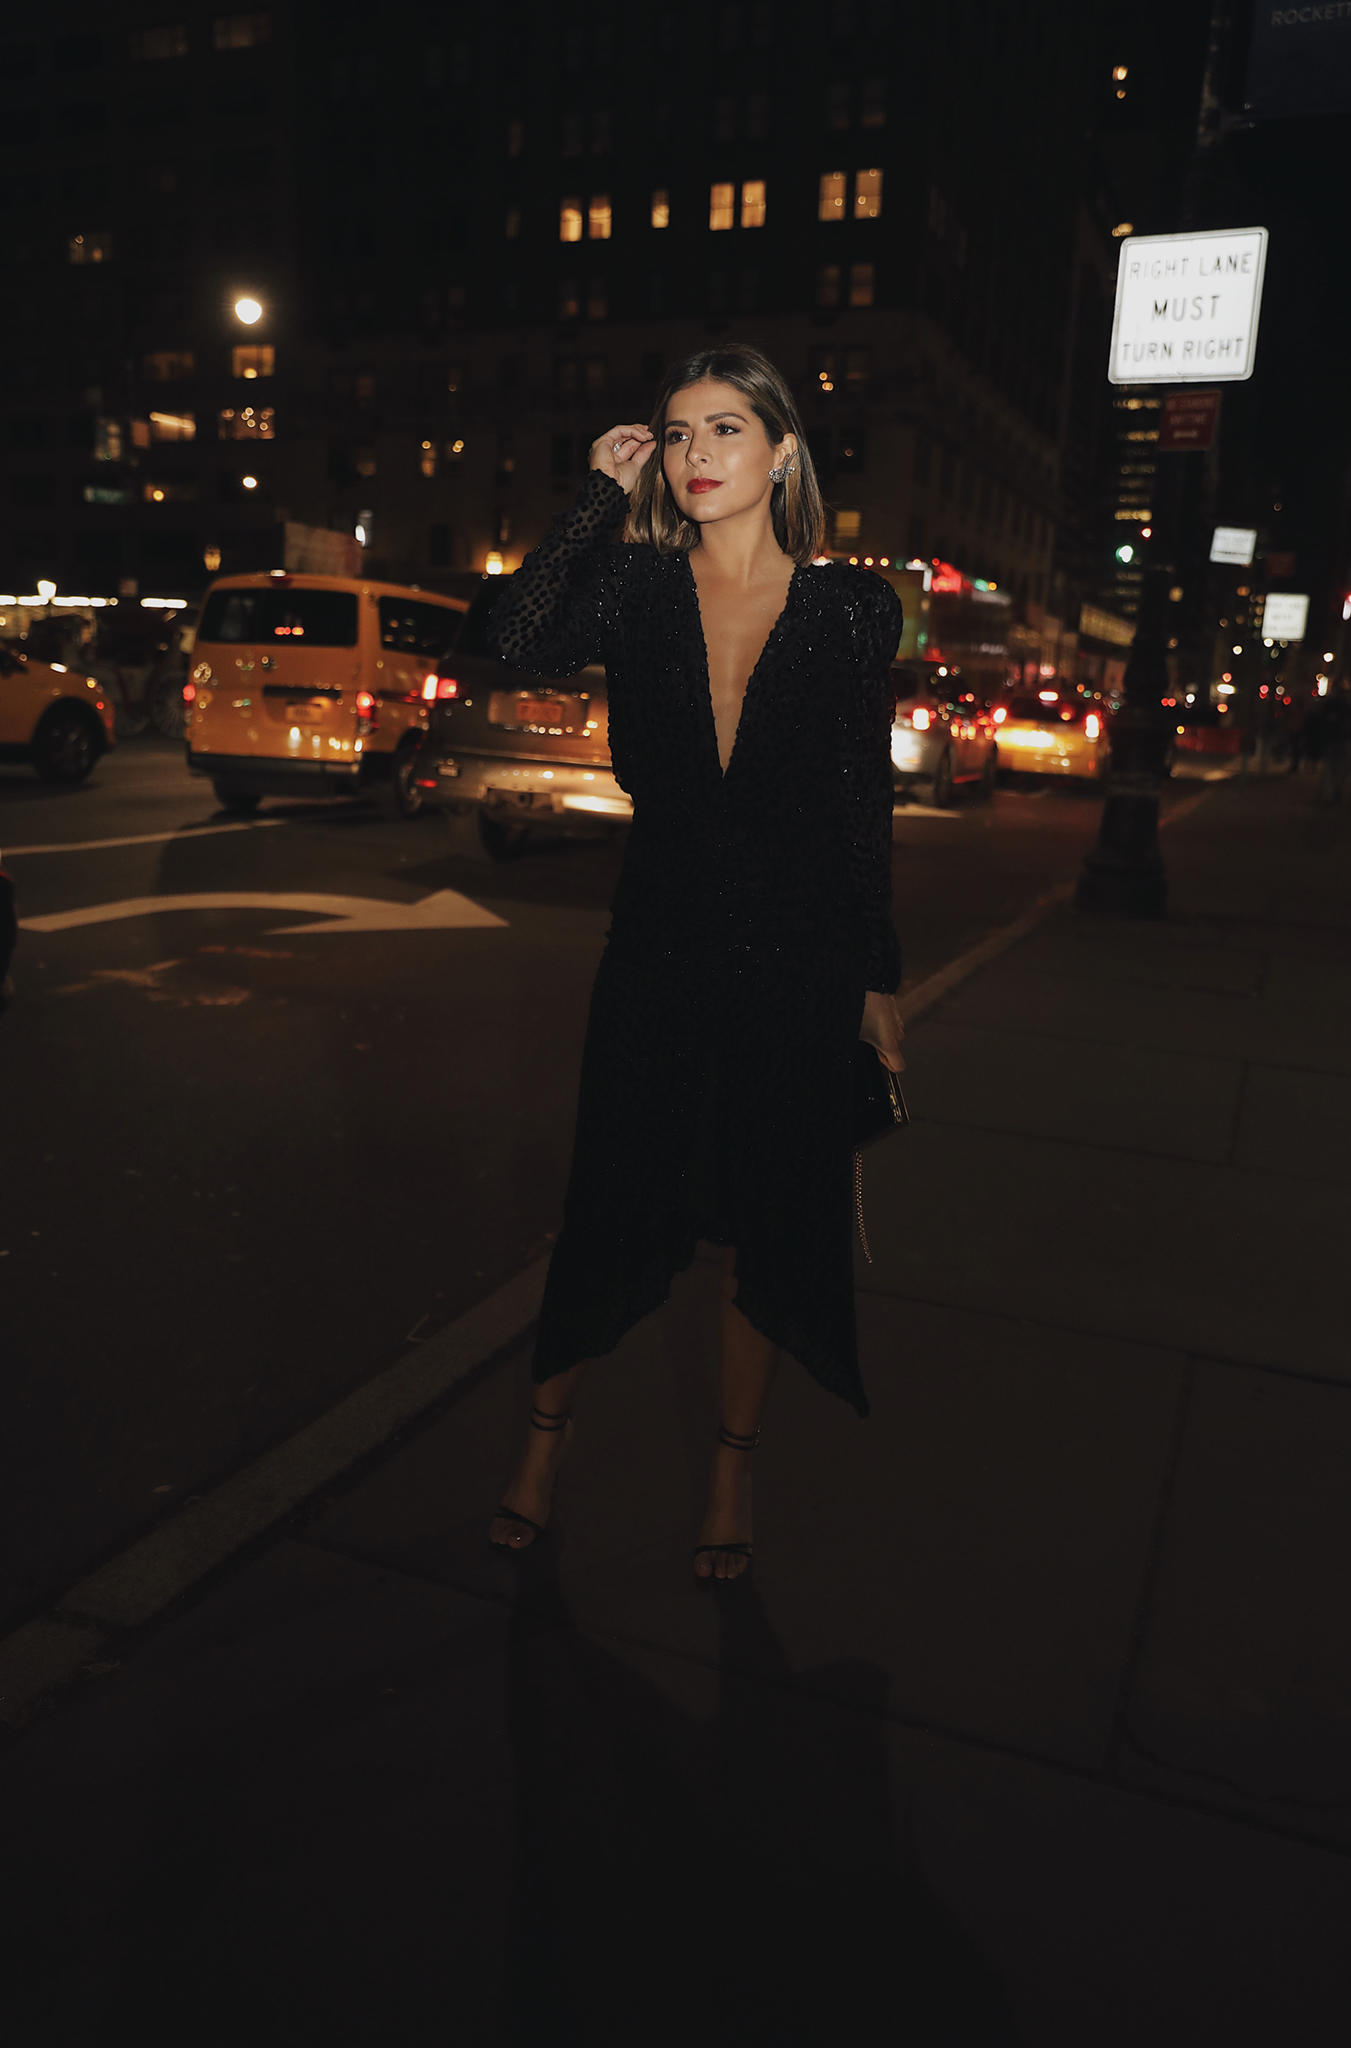 Holiday Party Dresses that Steal The Show by Pam Hetlinger | TheGirlFromPanama.com | Cocktail dress, formal evening dress, little black dress, plunging neckline dress